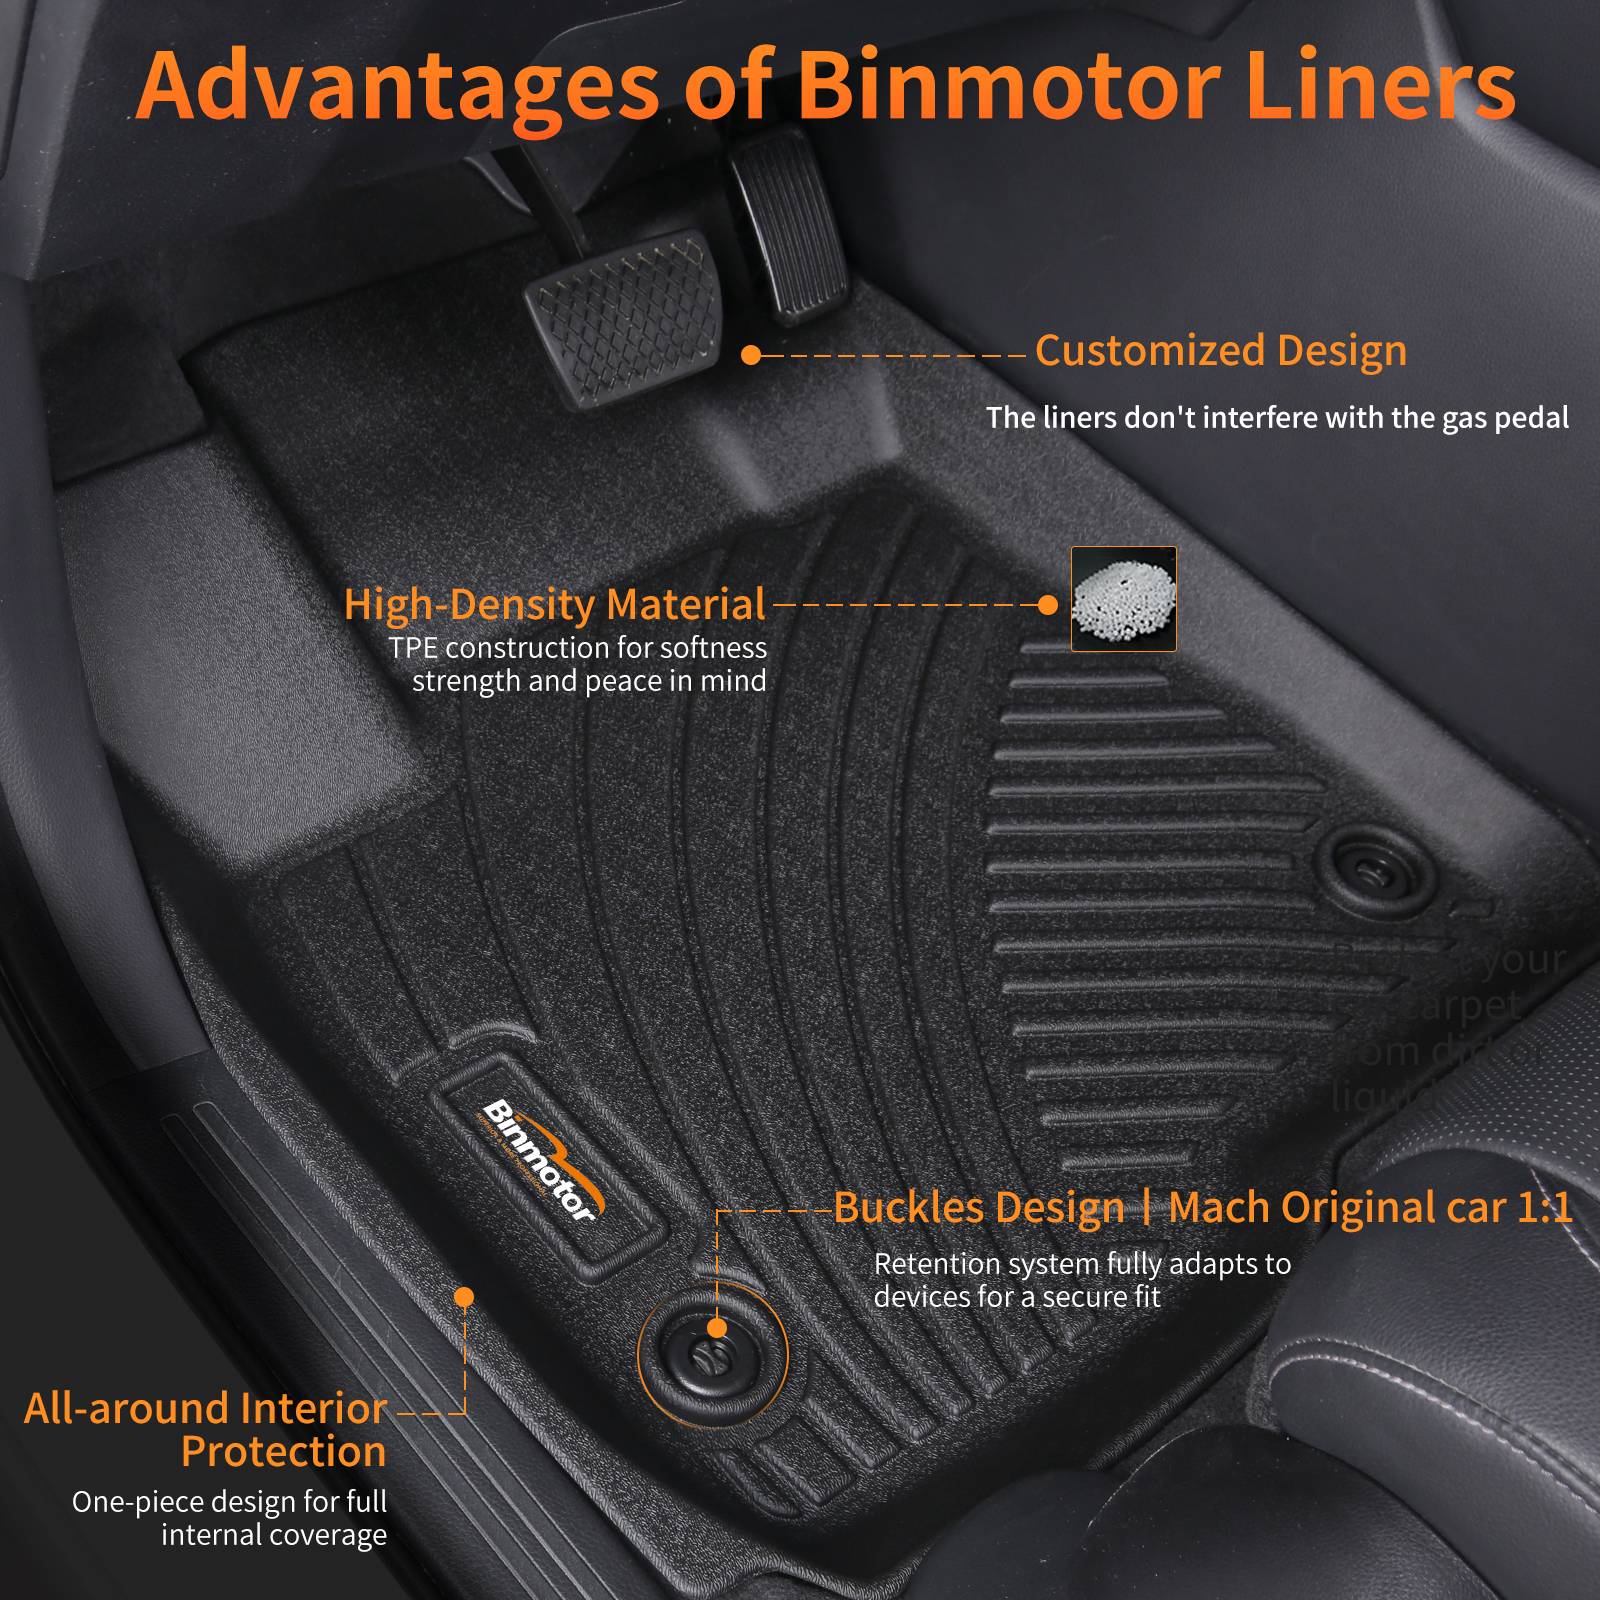 Binmotor-Floor Mats Custom for Mazda 3 All Weather Protection TPE Waterproof Non-Slip Car Floor Liners 1st & 2nd Row Set Accessories Black(compatible year 2014-2018)